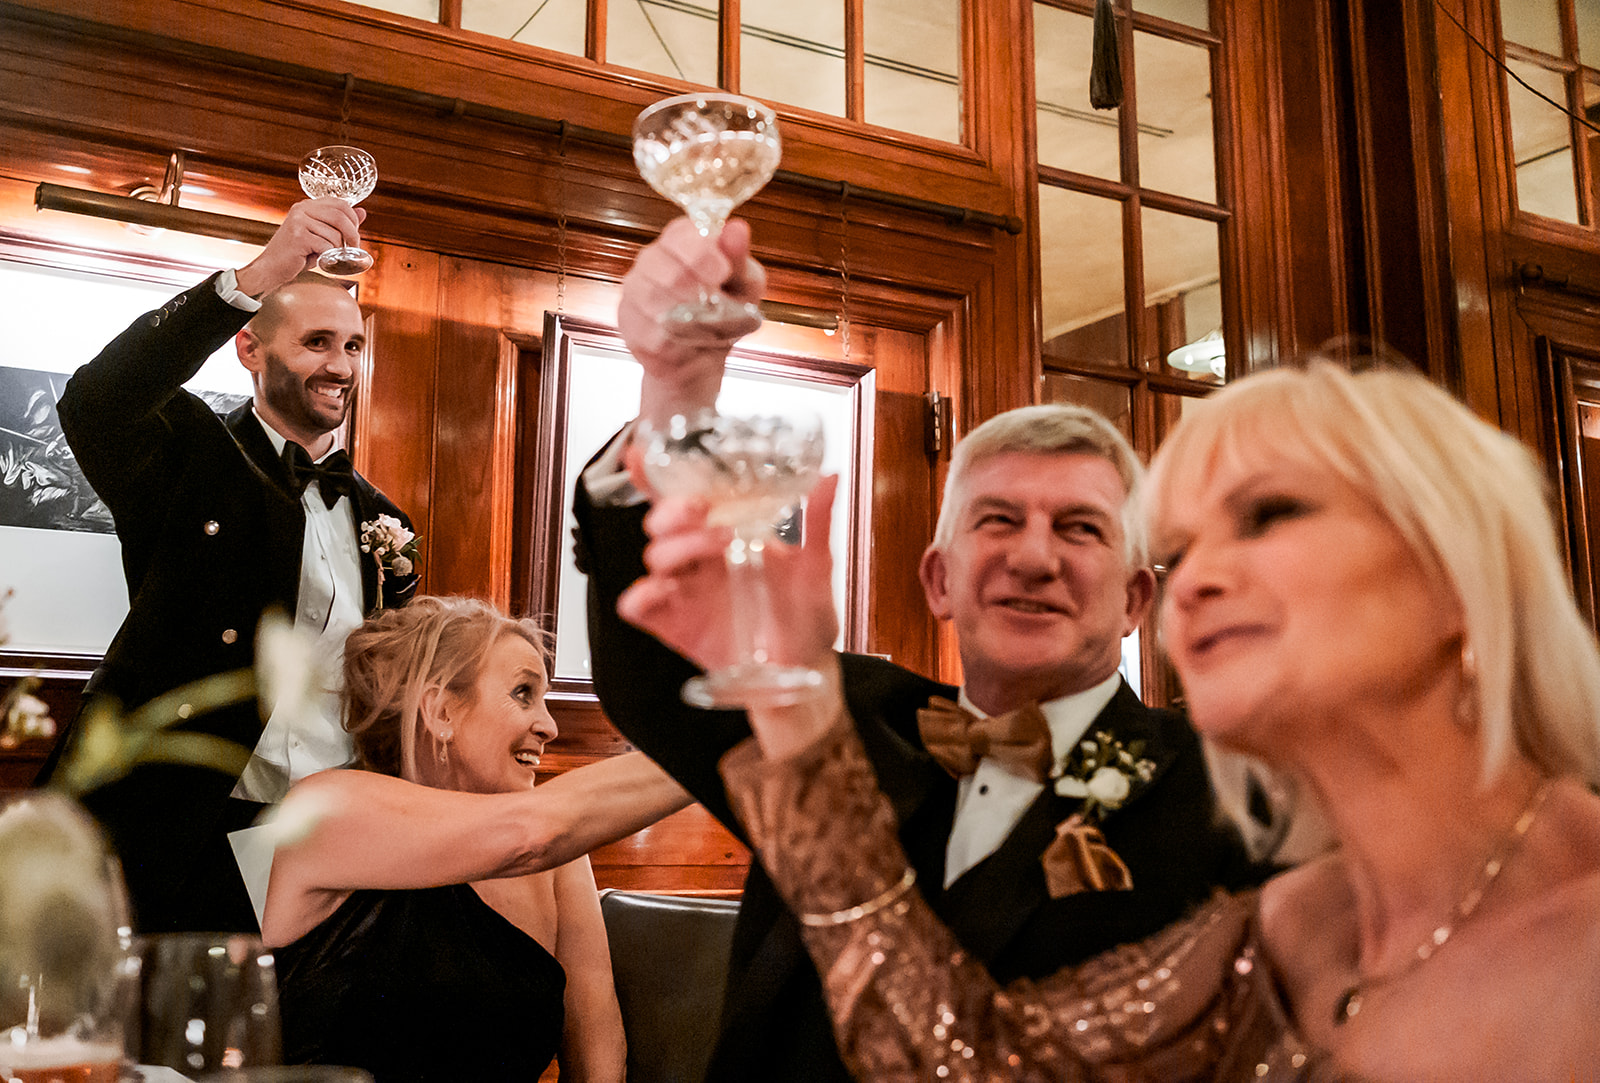 A toast! Photography by Emis Weddings